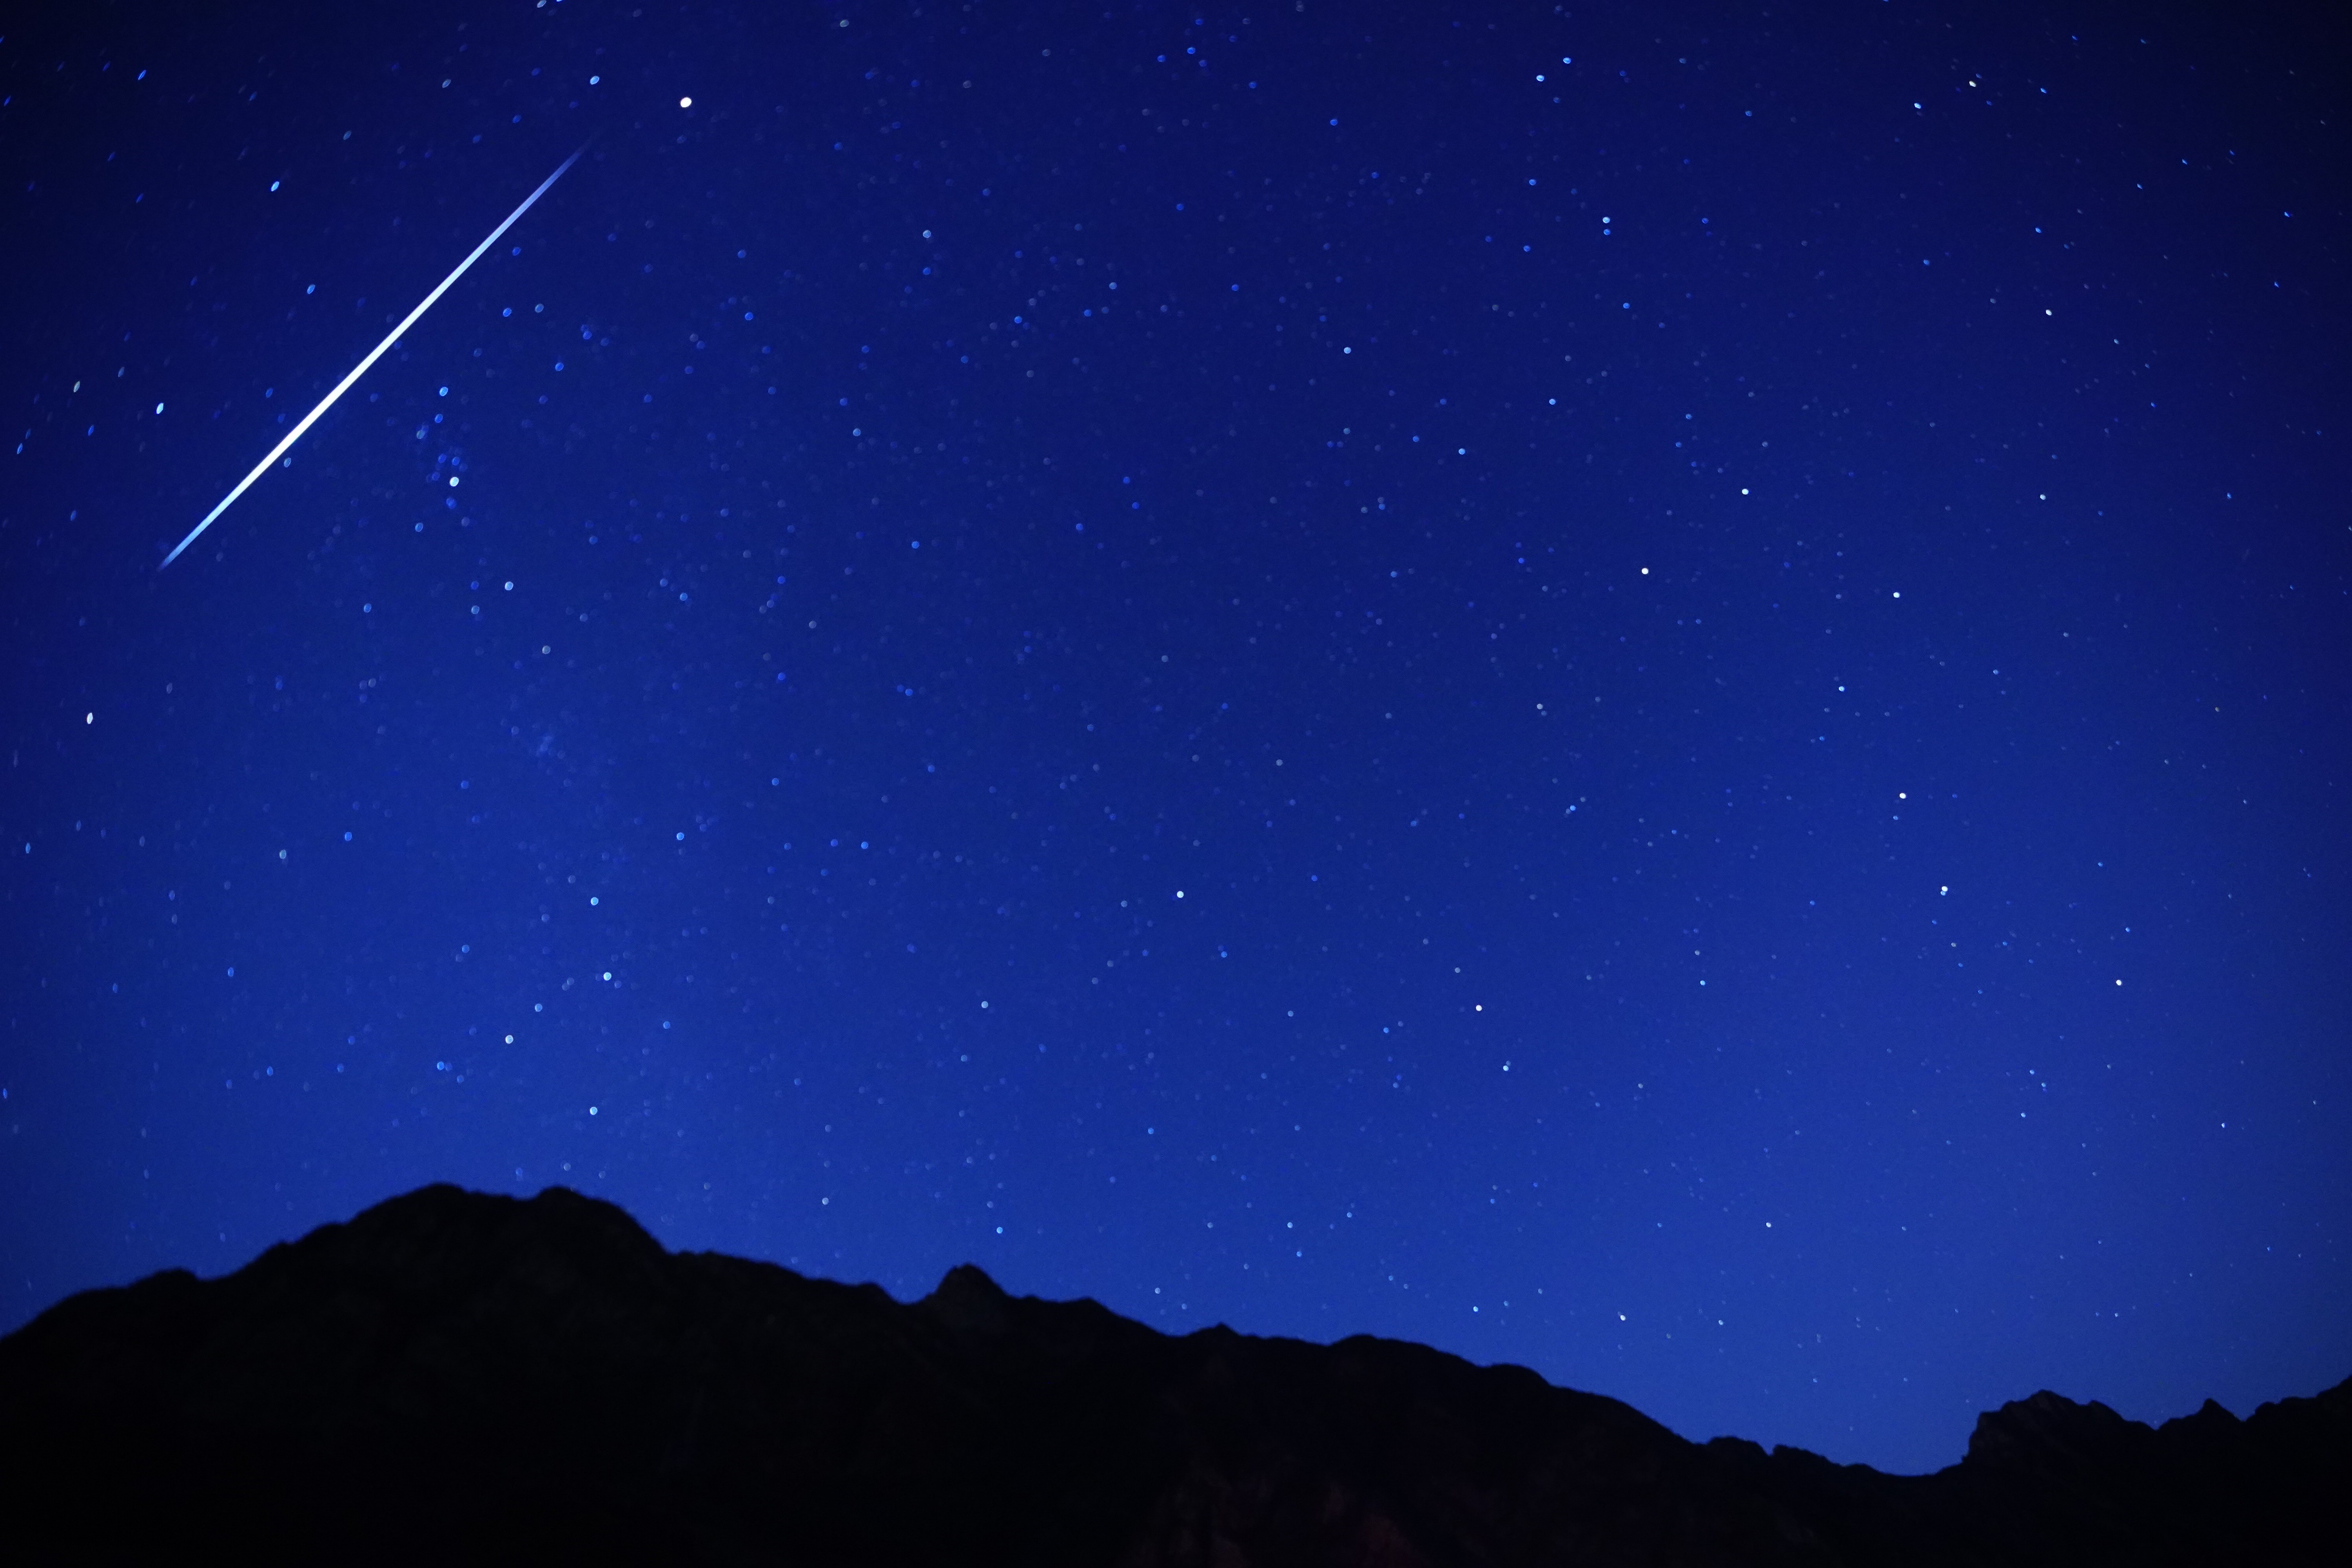 ‘Must-see event’: Geminid meteor shower to peak on evening of Dec. 13